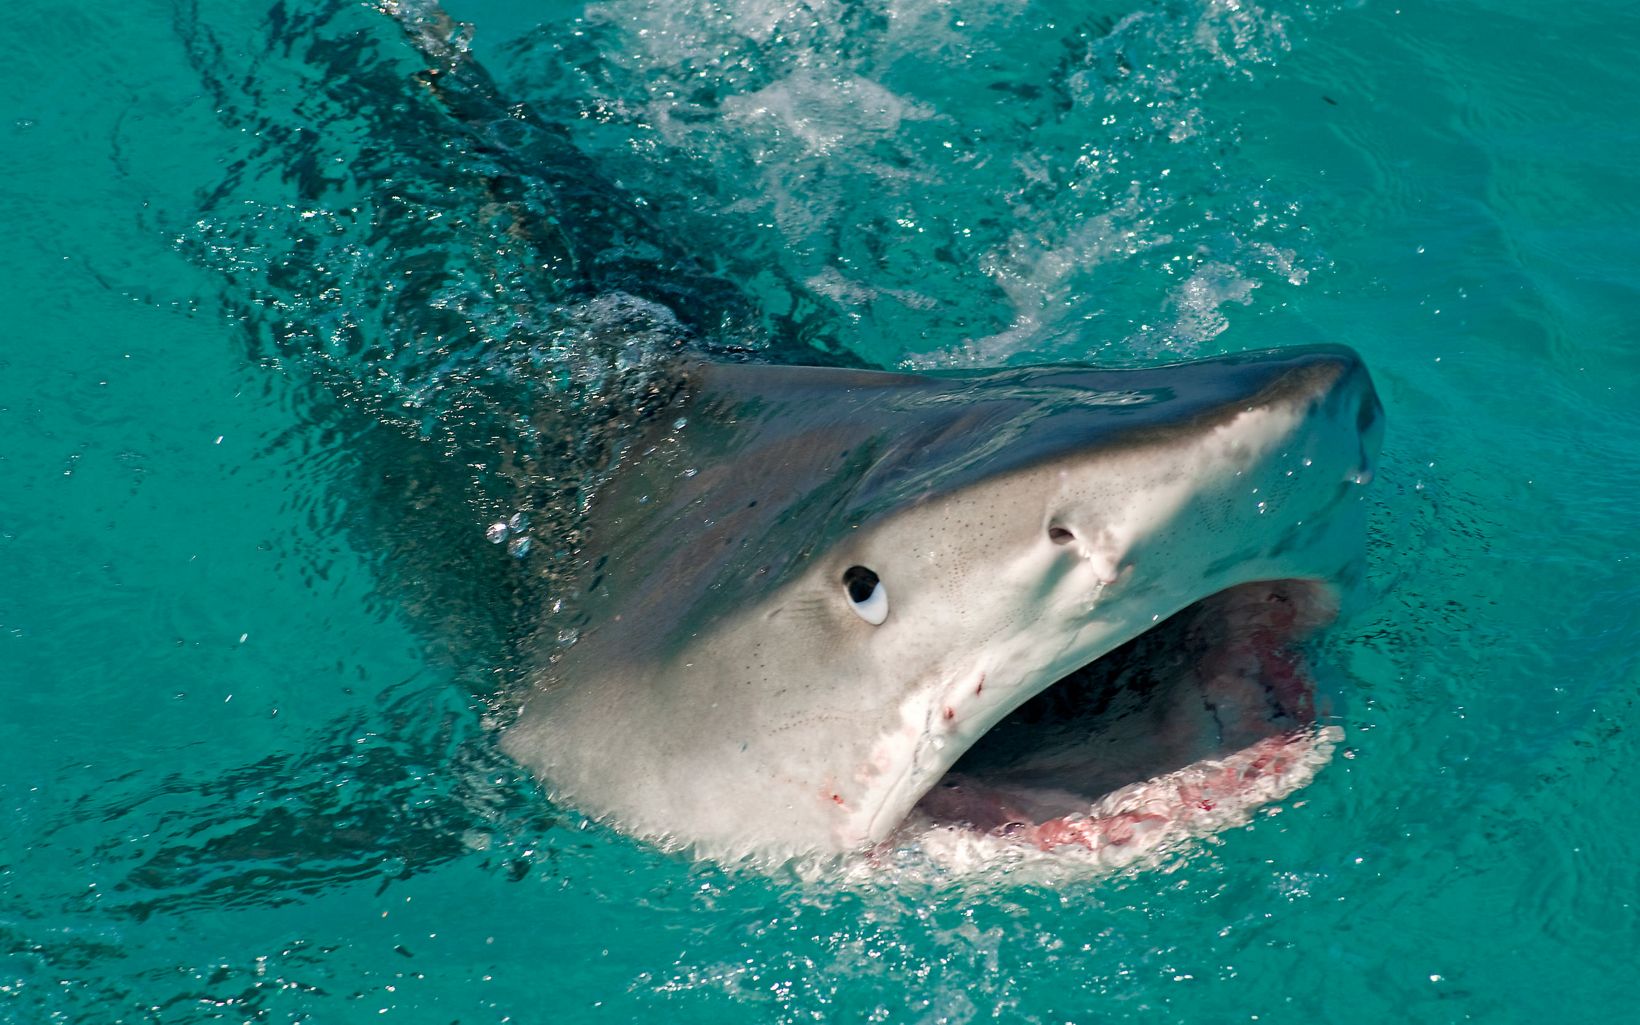 a shark raising its head above the surface of the water with its mouth open